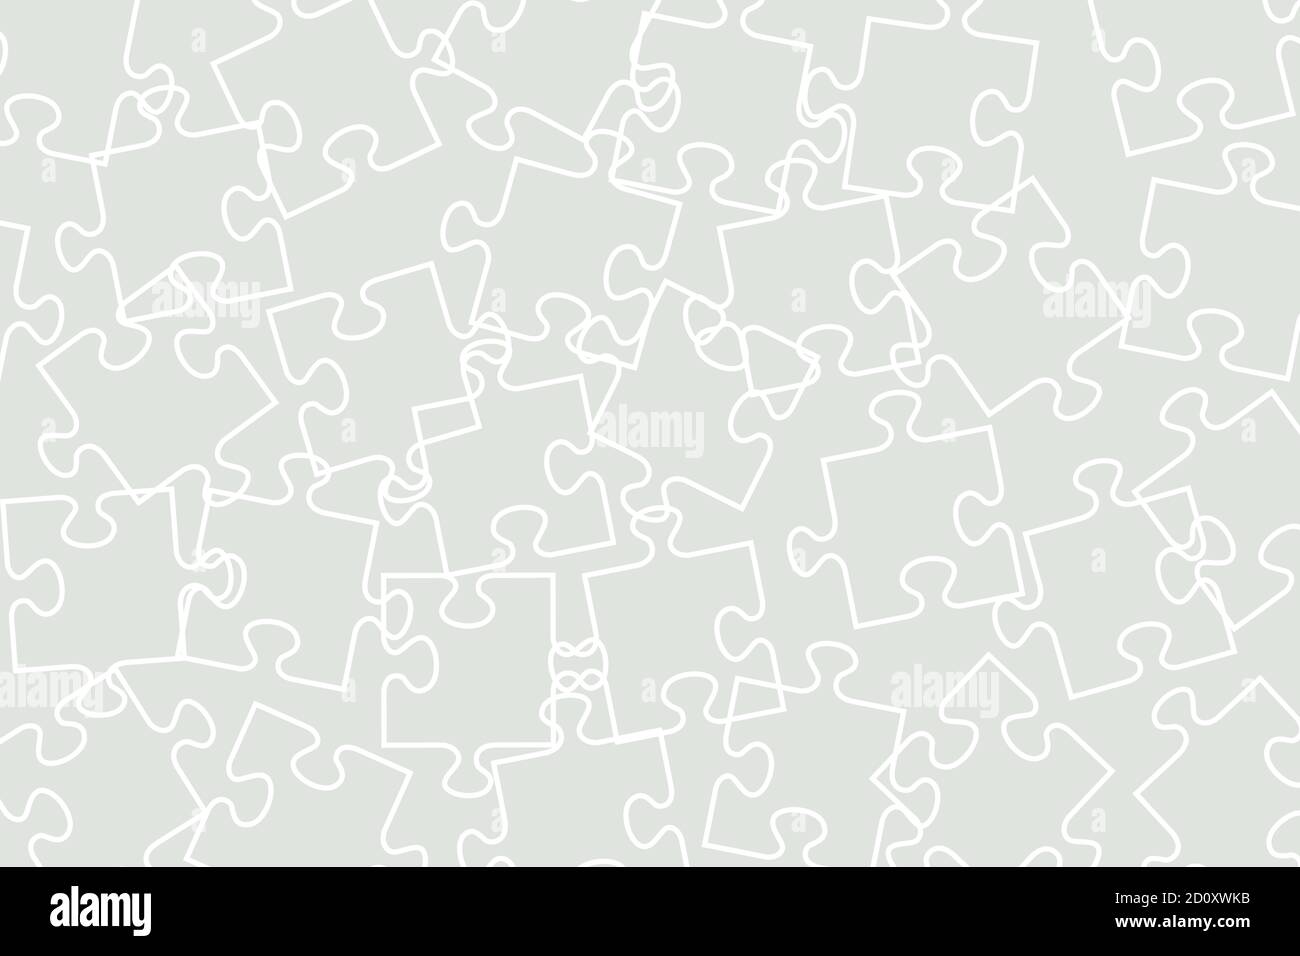 Puzzle background, banner, blank. Vector jigsaw section template.  Confusion of pieces, mess mosaic. Stock Vector